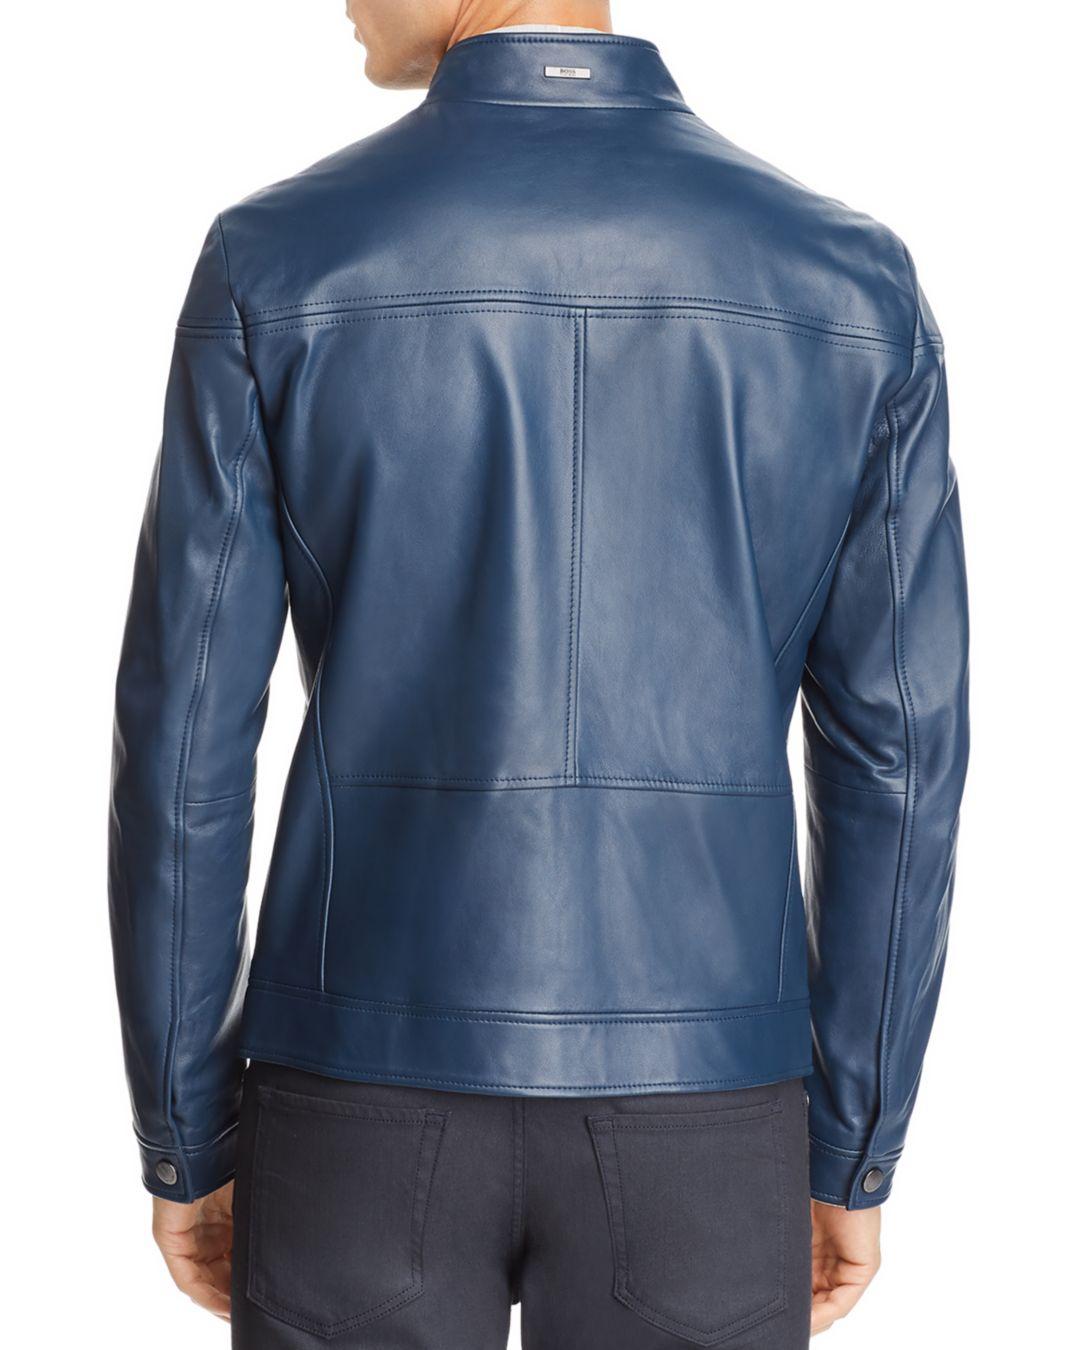 hugo boss nocan leather jacket OFF 58% - Online Shopping Site for Fashion &  Lifestyle.